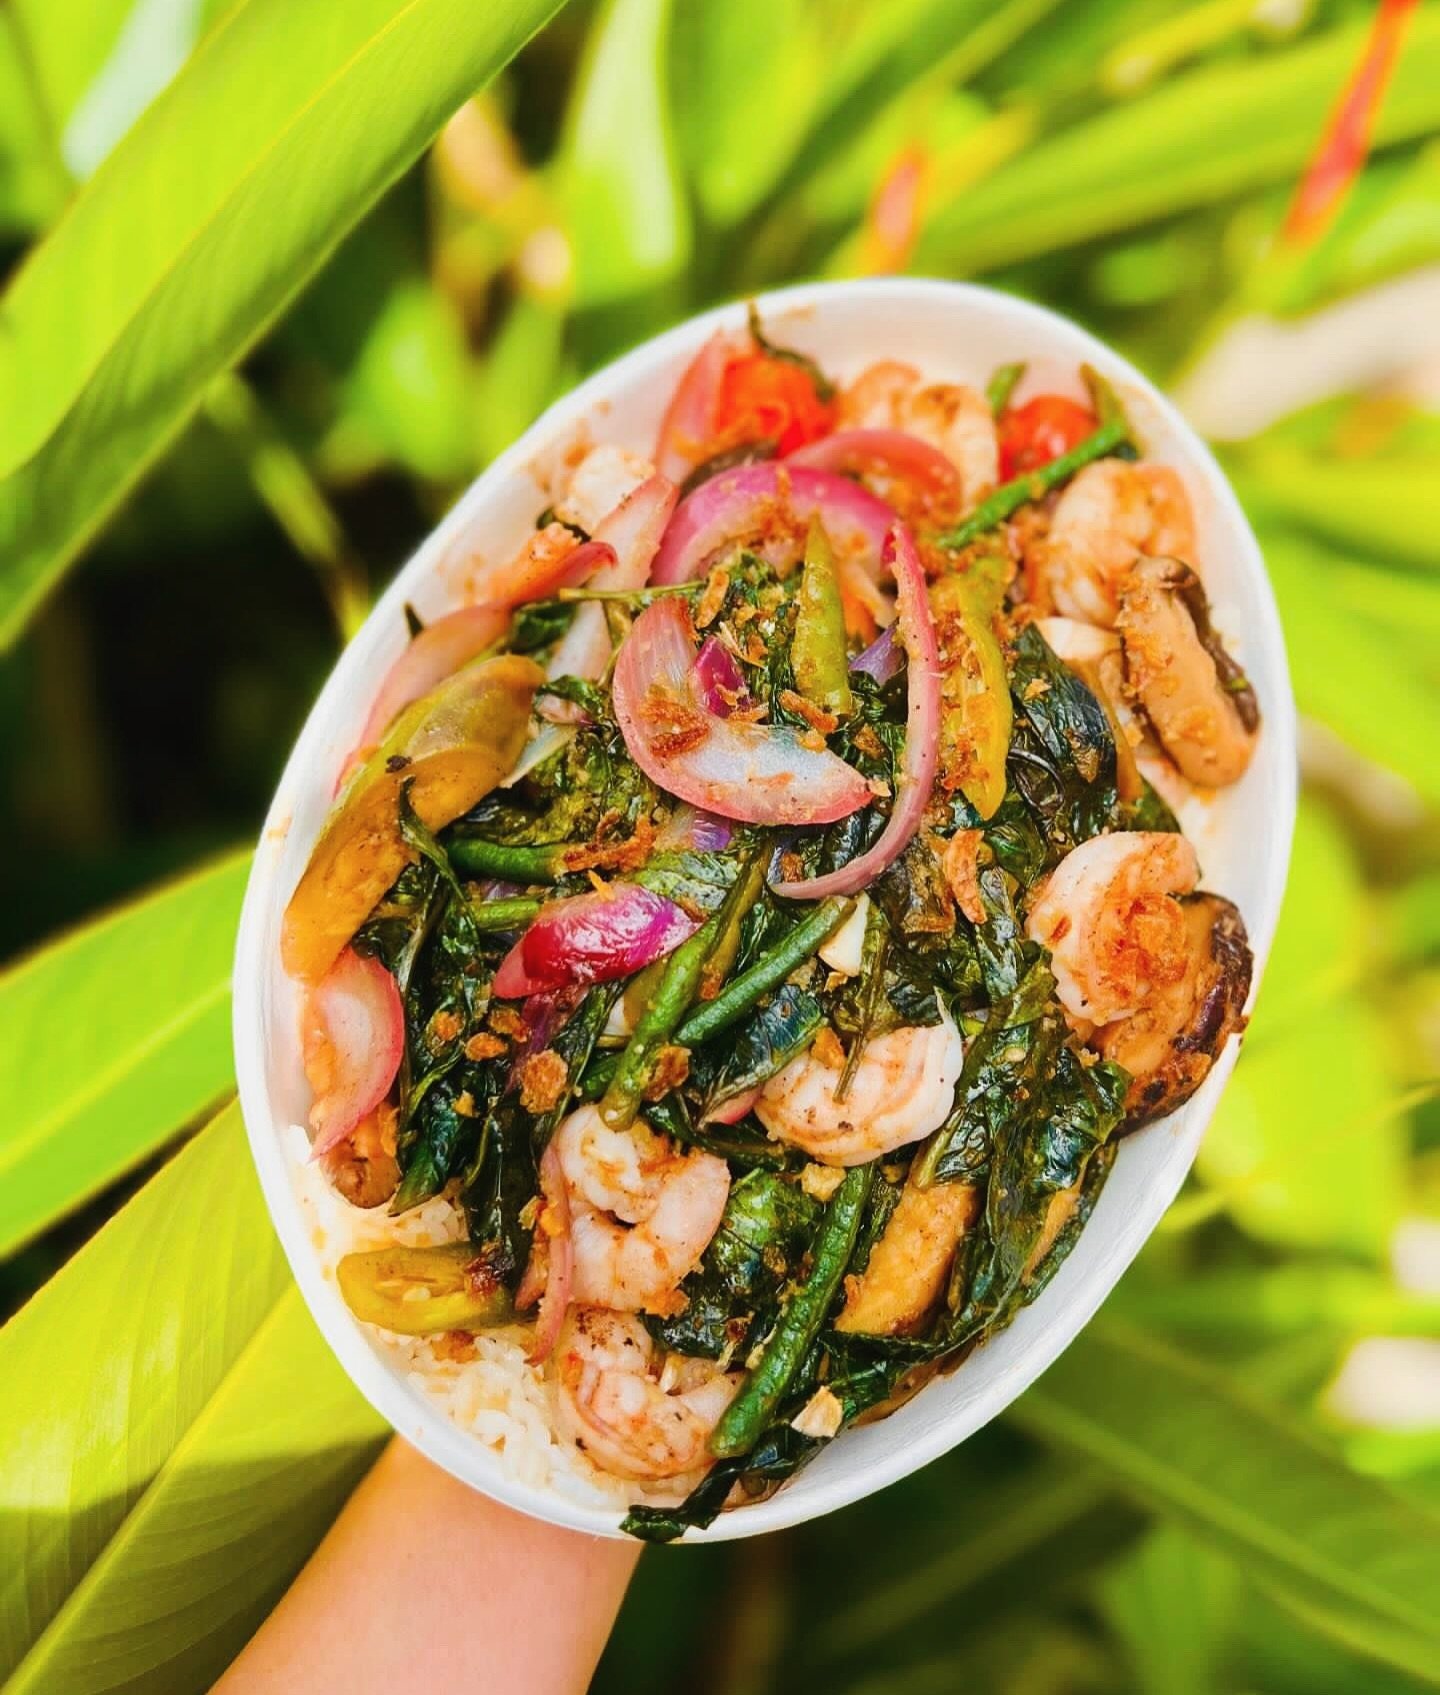 &ldquo;🌧️☔ Embracing the rainy vibes this Thursday! Join us from 12pm to 4pm, come rain or shine! 🌈✨ Feast your eyes on our delicious Tamarind Shrimp Bowl with vegetables. 🍤🥗 

📷: @yuzu_and_guavas 😀

#minasahawaii #tamarindshrimp #hawaii #waipa